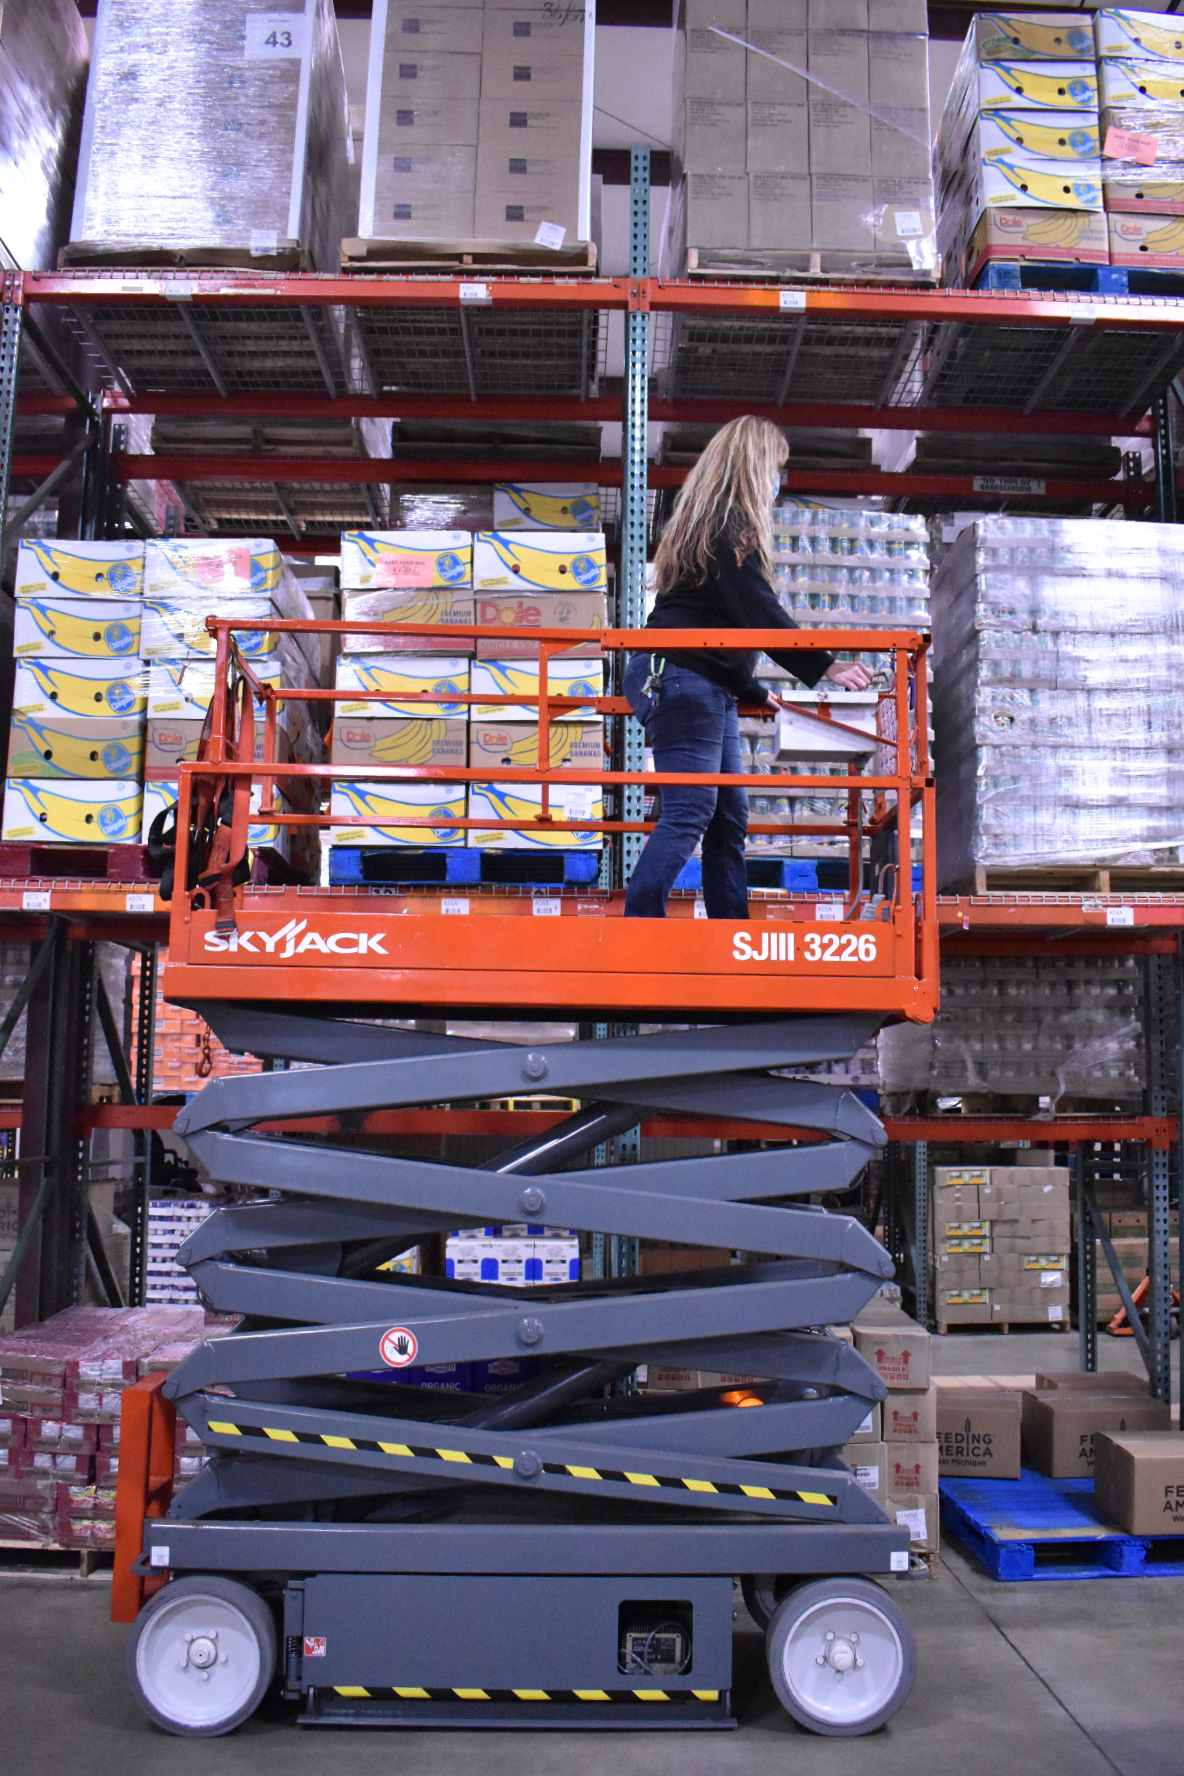 Leslie demonstrates the scissor lift, which has a caged platform to stand on and an accordion to push it up high.